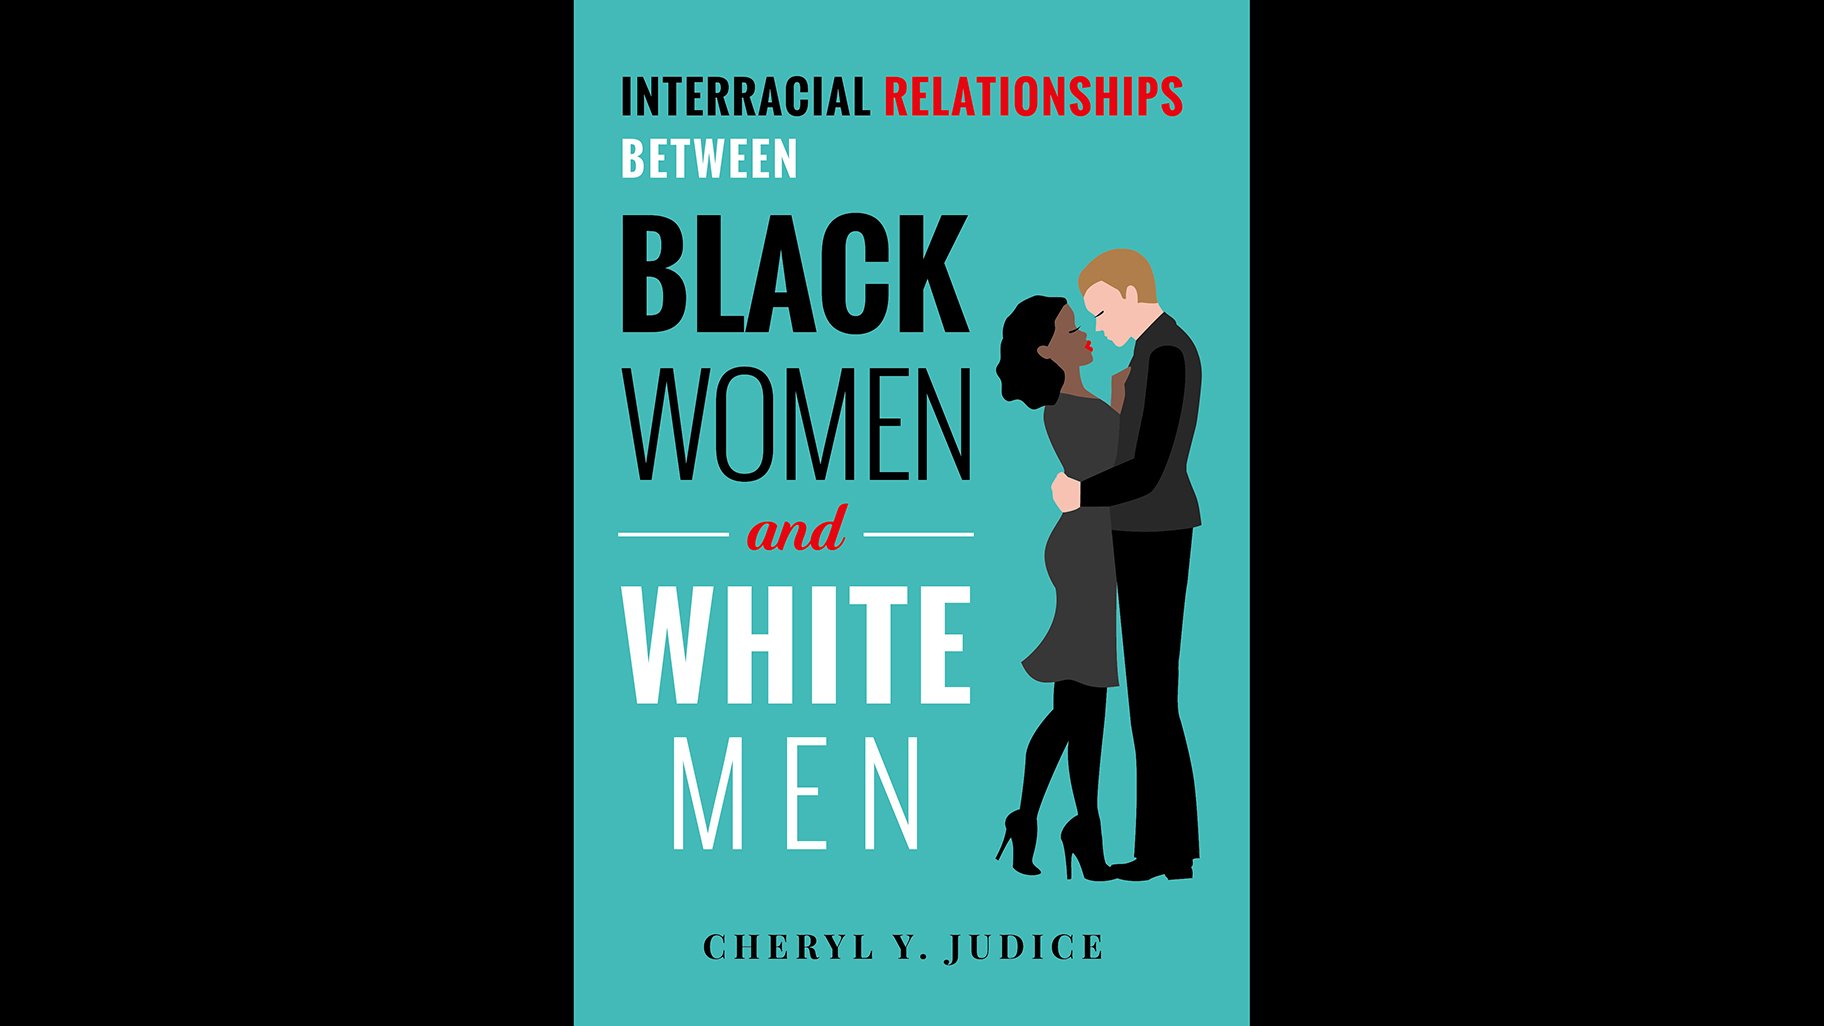 becky posey recommends Black Man White Woman Photos